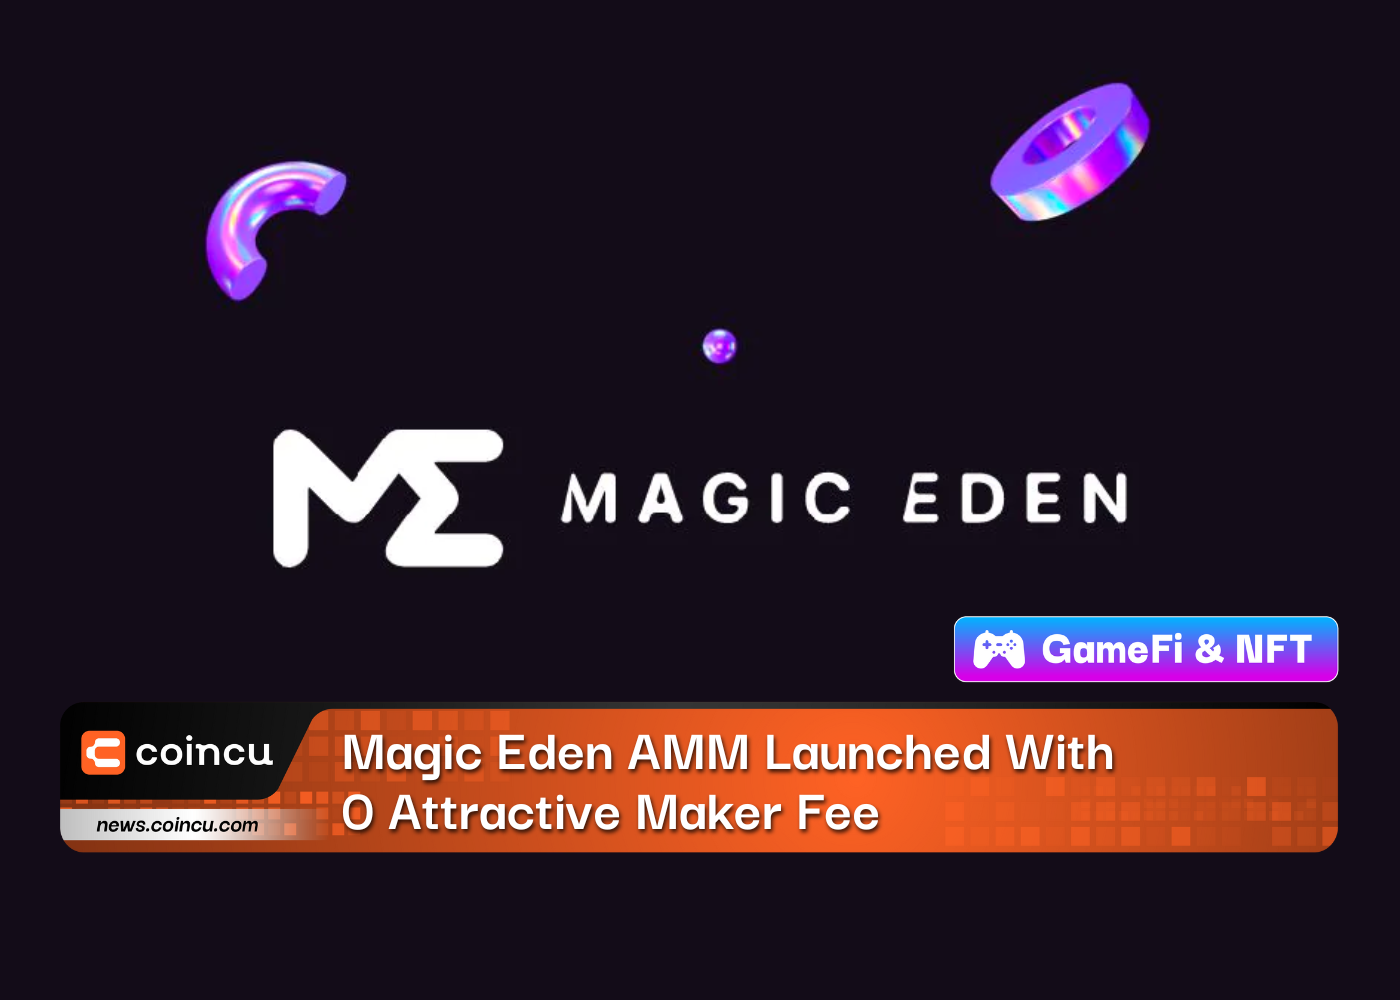 Magic Eden AMM Launched With 0 Attractive Maker Fee